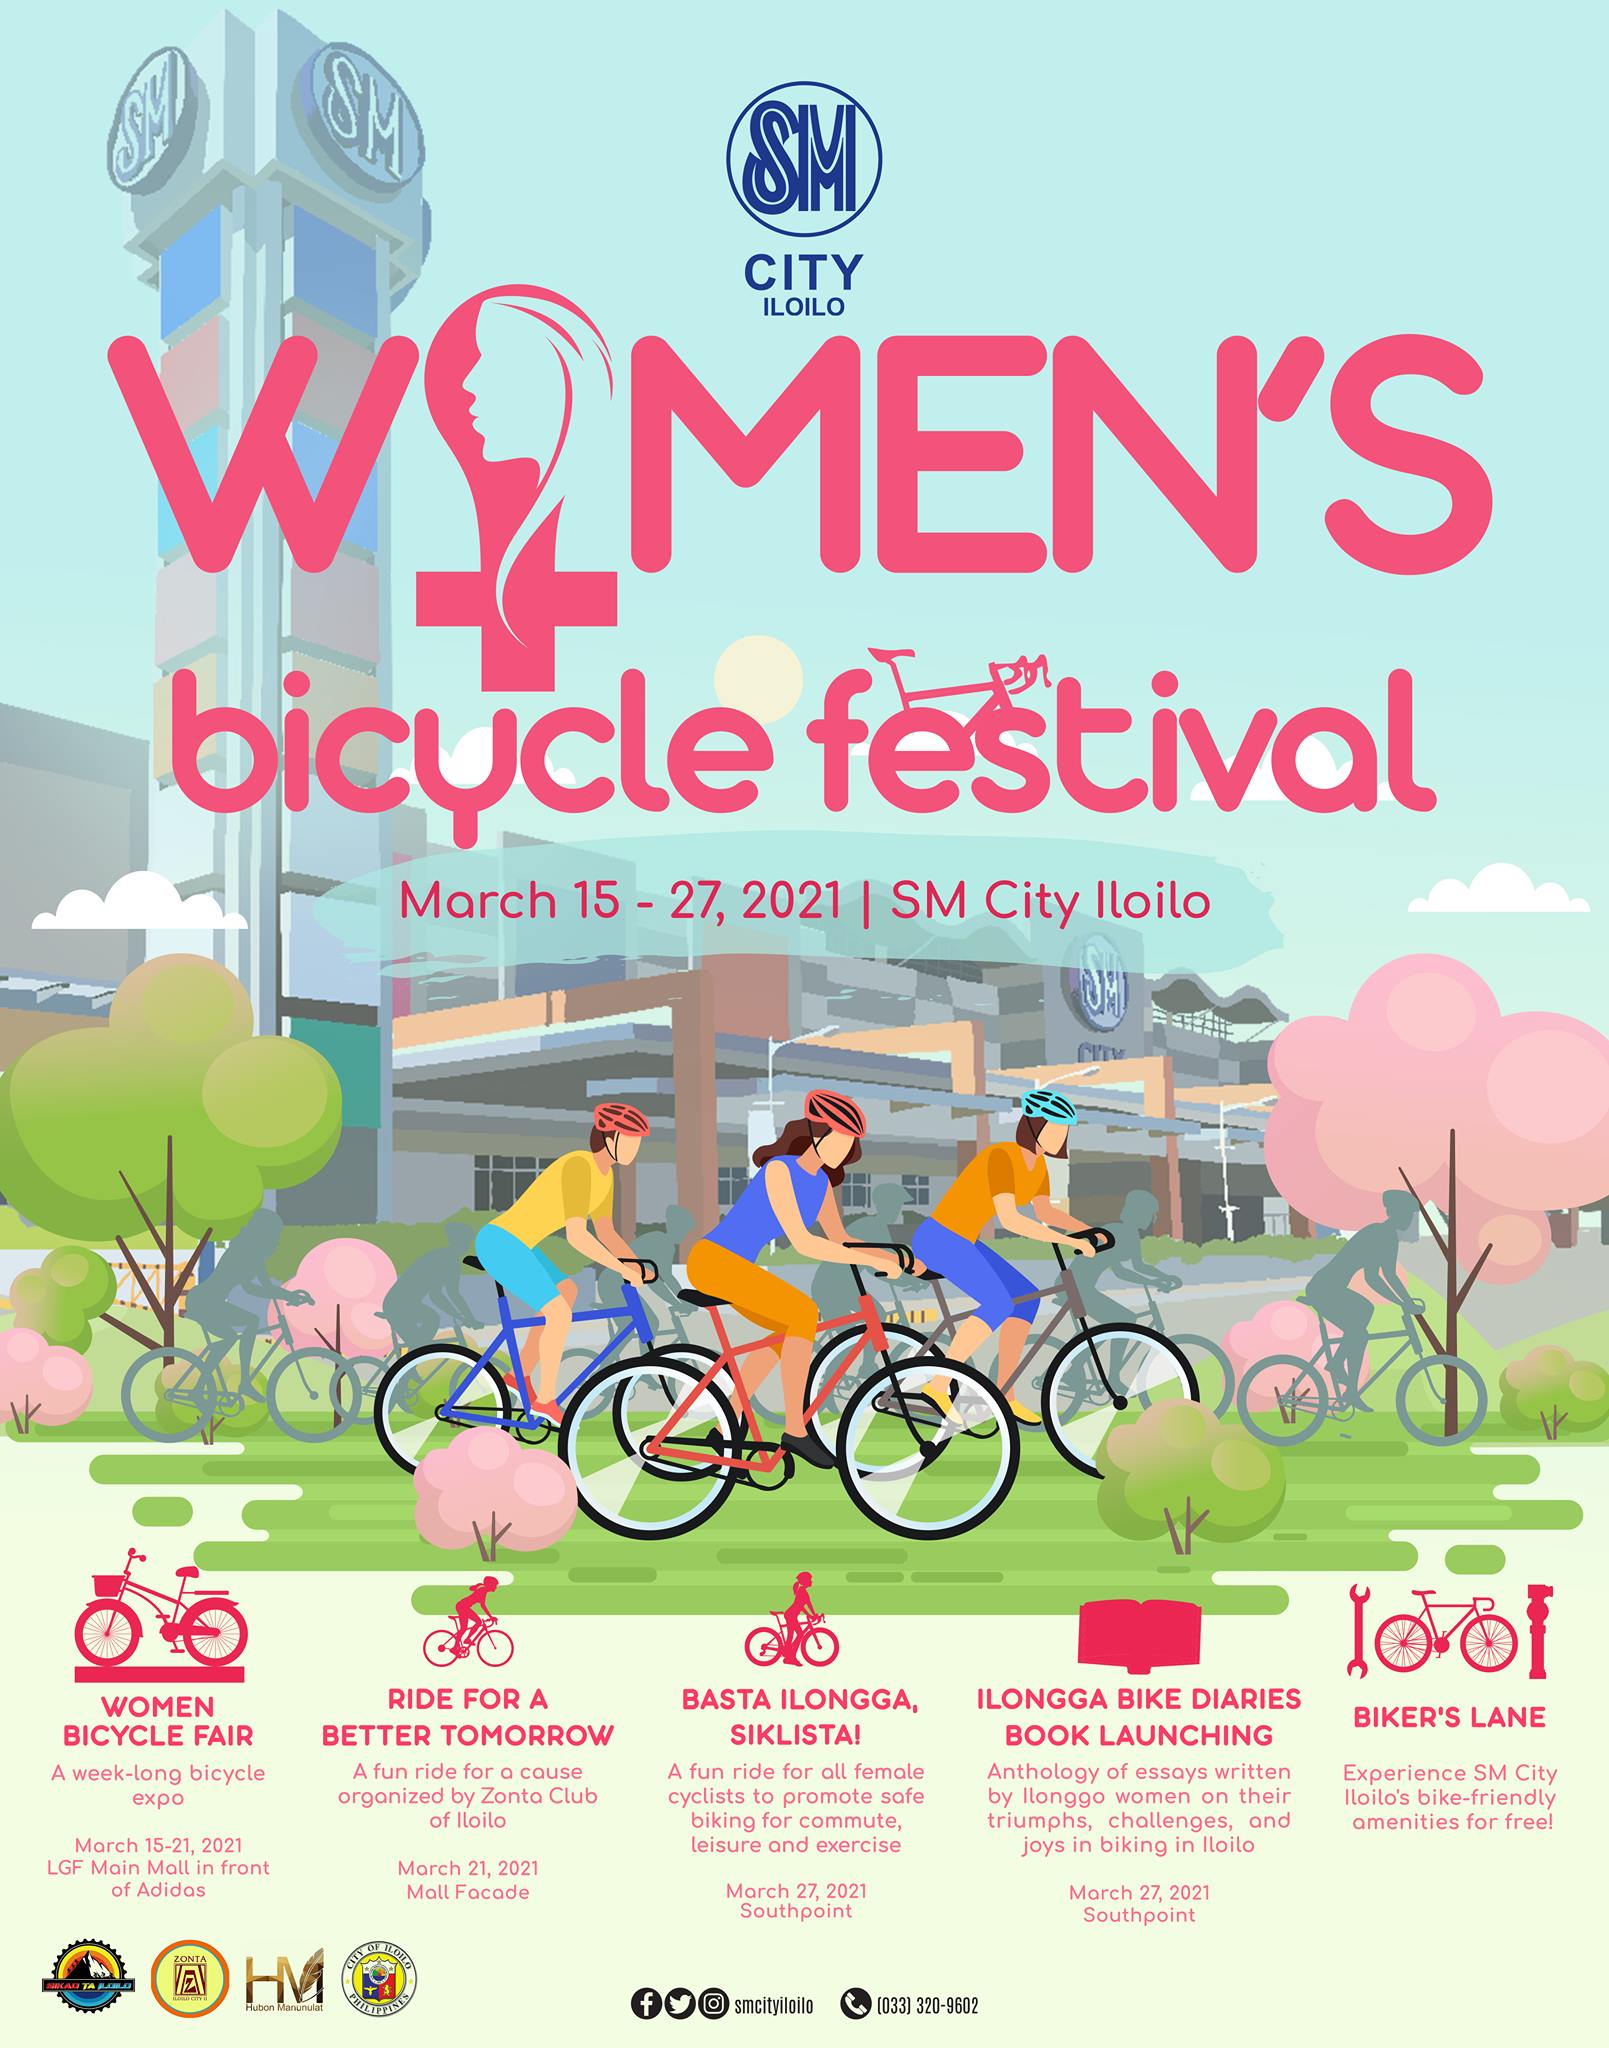 Iloilo Women's Bicycle Festival, another 1st! People's Domain